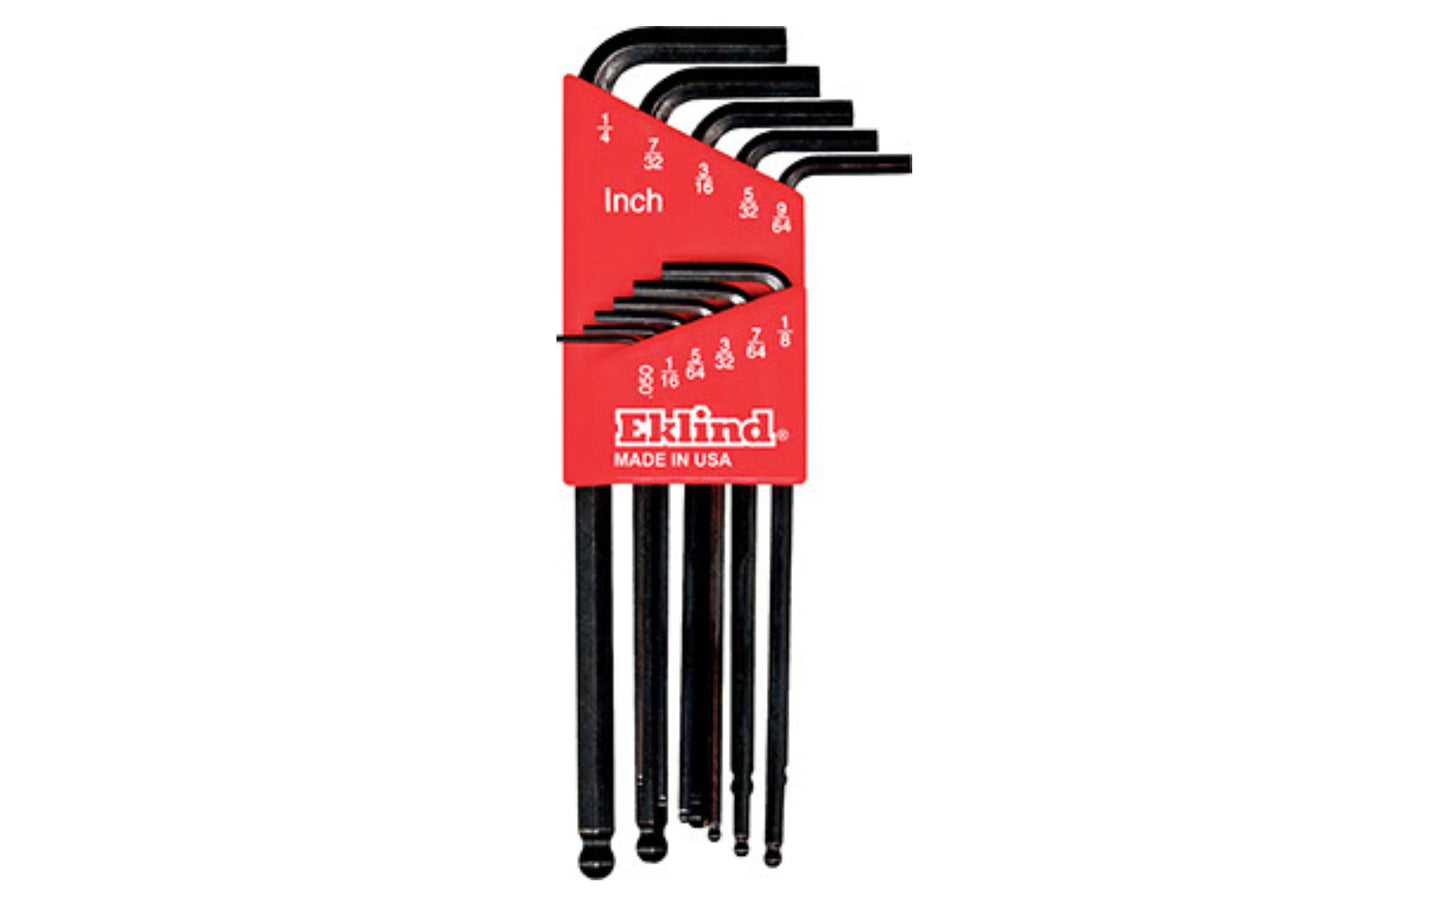 This Eklind 11-PC Ball Hex-L Wrench Key SAE Set. .050", 1/16", 5/64", 3/32", 7/64",  1/8", 9/64", 5/32", 3/16", 7/32", & 1/4" sizes. Allen wrench set is hardened, tempered & finished with Eklind black finish to resist rust. Plastic holder firmly retains each key. Eklind model 13211. Made in USA.